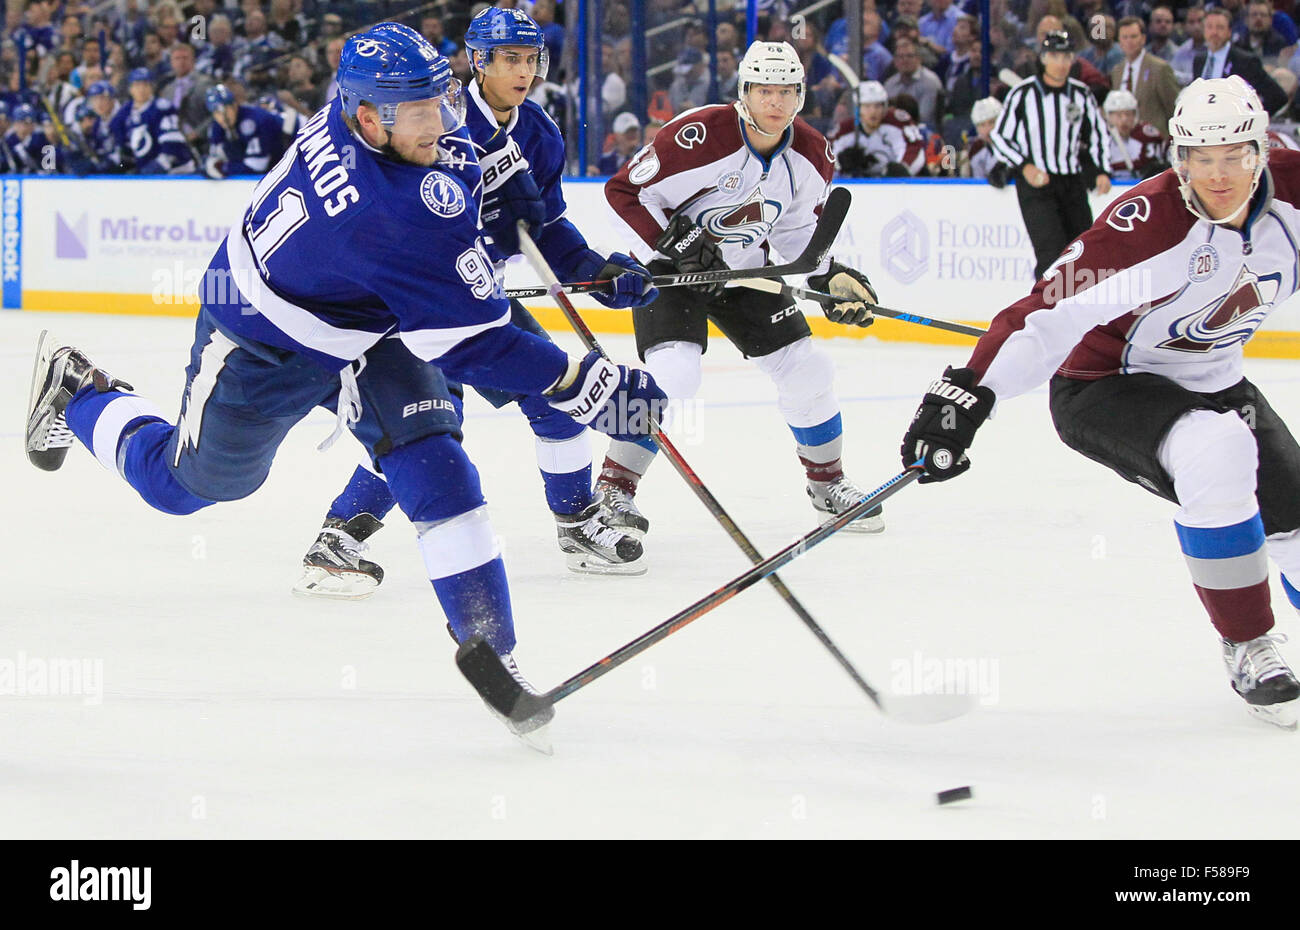 Tampa, Florida, USA. 29th Oct, 2015. Tampa Bay Lightning center Steven Stamkos (91) is unable to score while shooting against the Colorado Avalanche during first period action at the Amalie Arena in Tampa Thursday evening (10/29/15) Credit:  ZUMA Press Inc/Alamy Live News Stock Photo